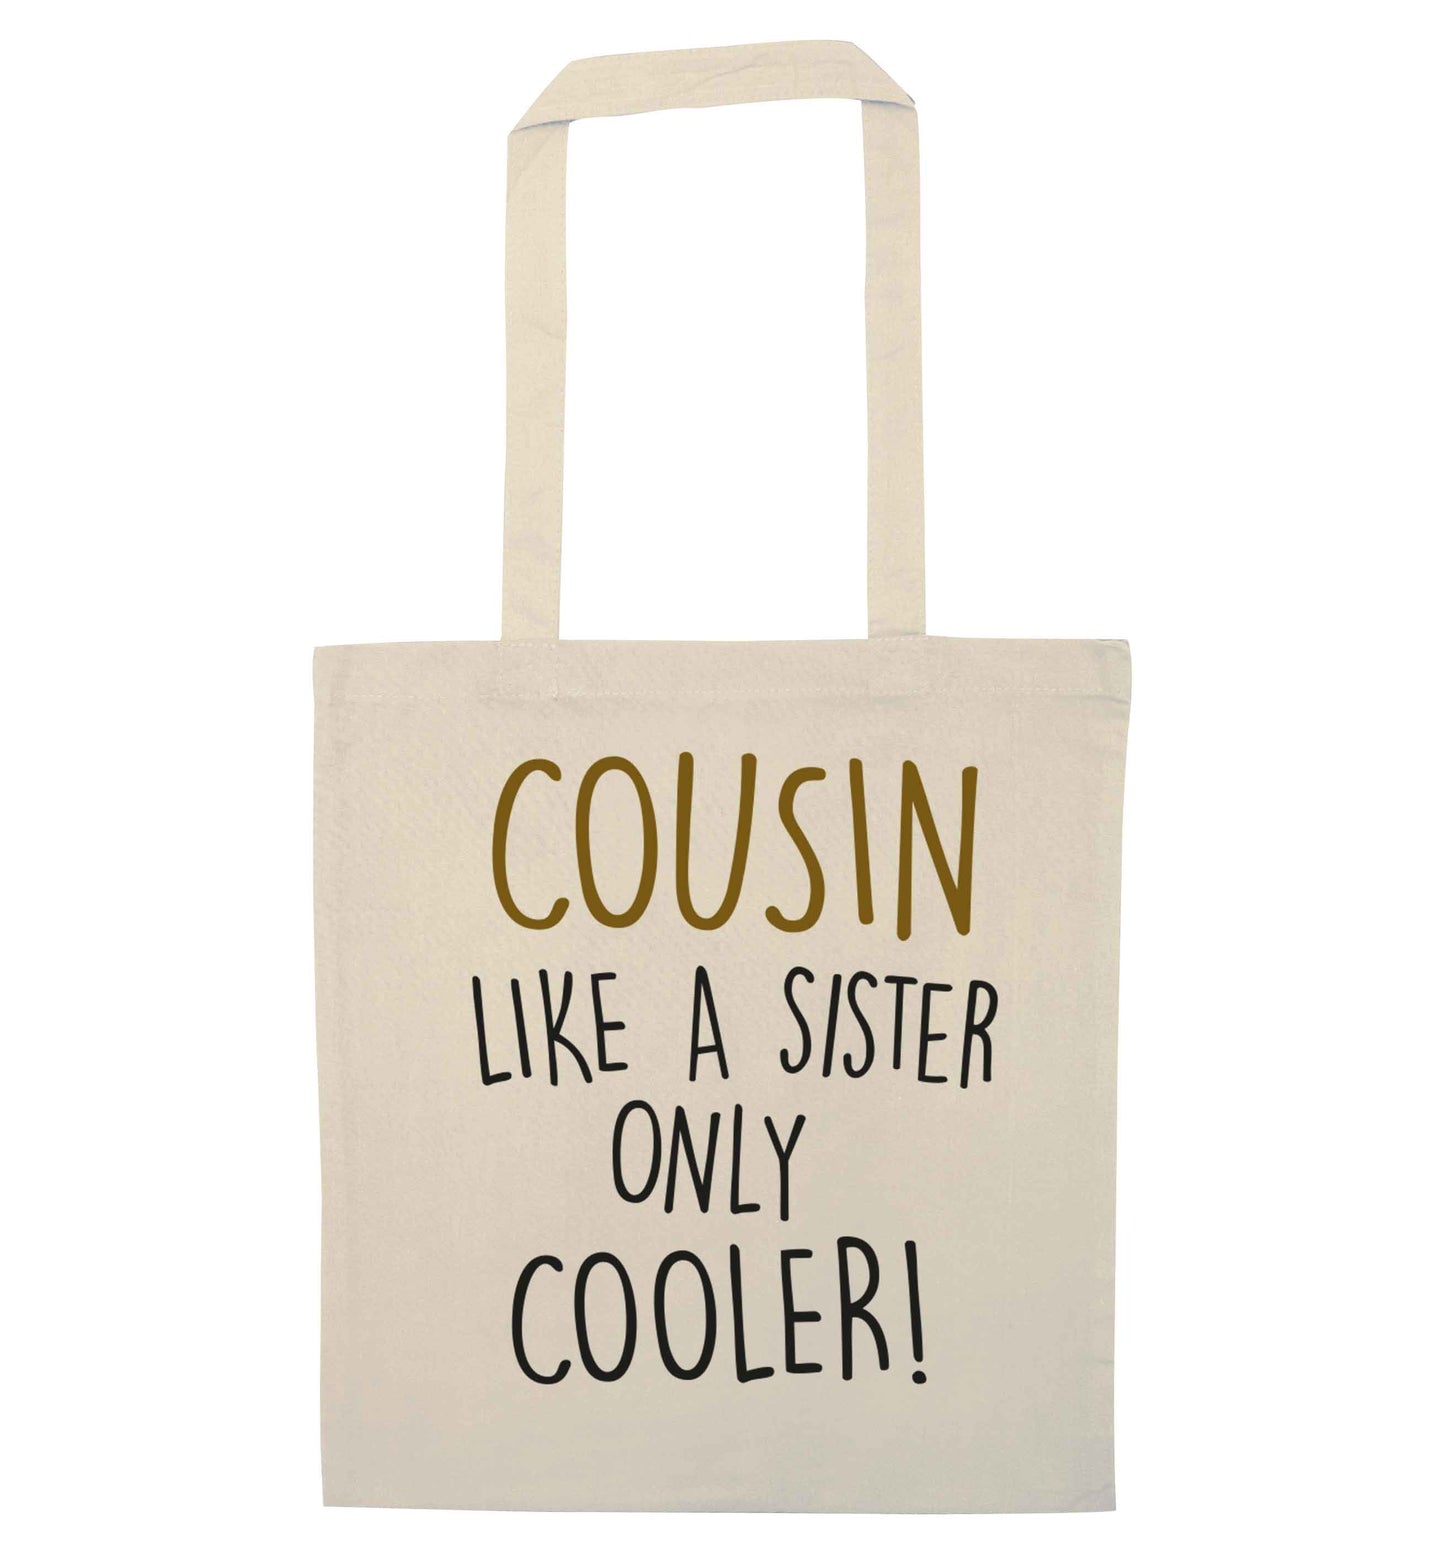 Cousin like a sister only cooler natural tote bag